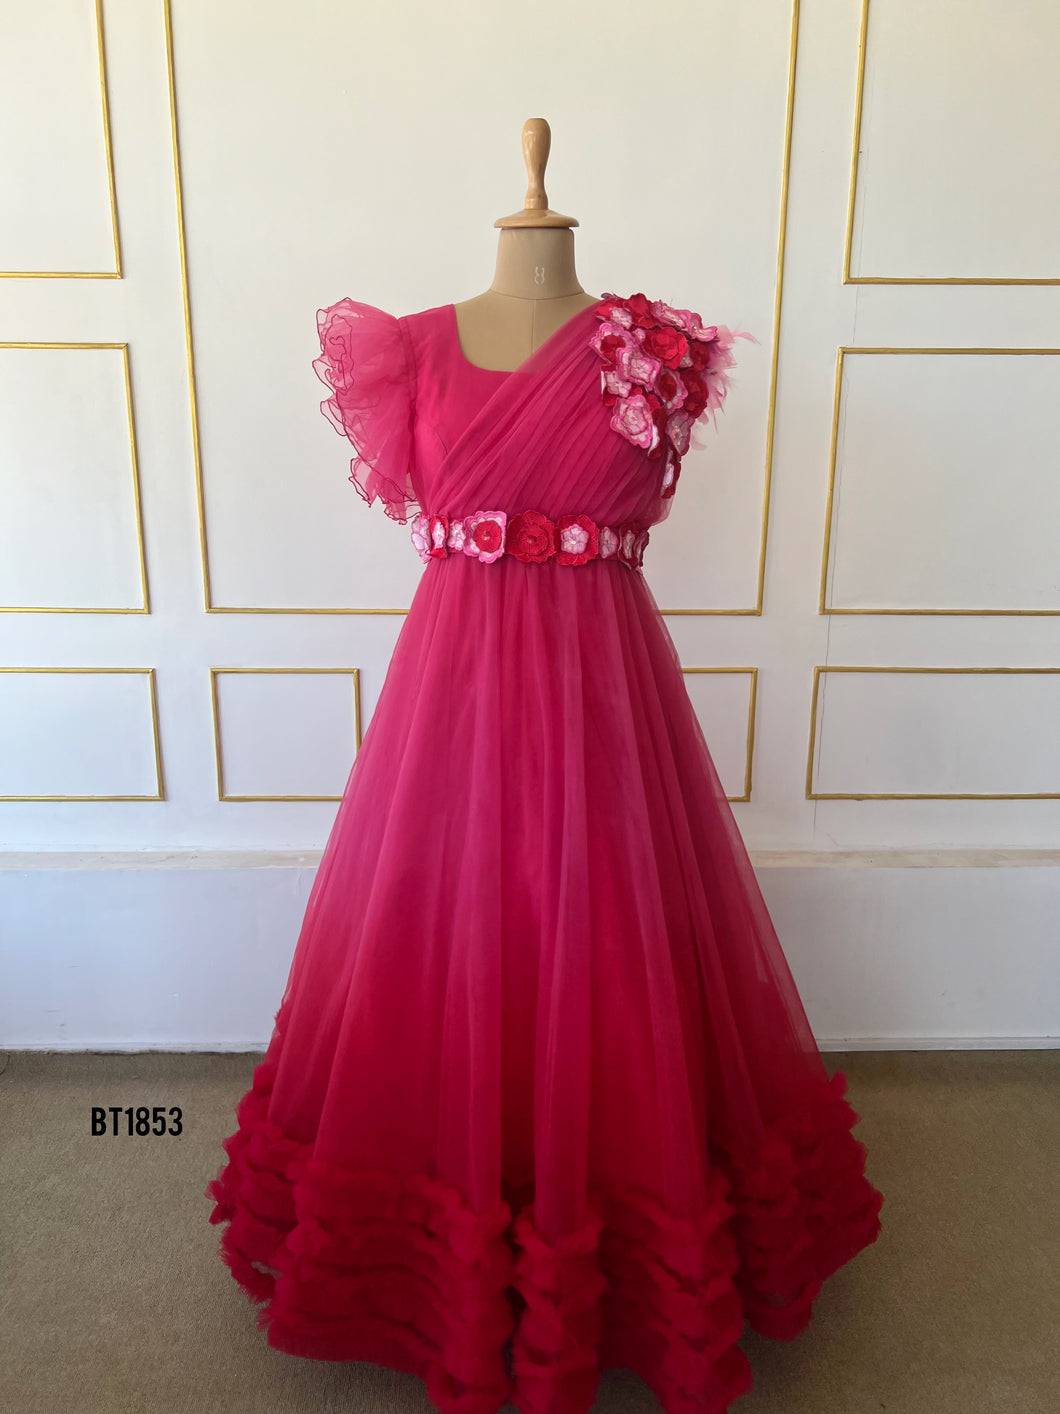 BT1853 Crimson Blossom Gala Gown - Celebrate Togetherness in Style!